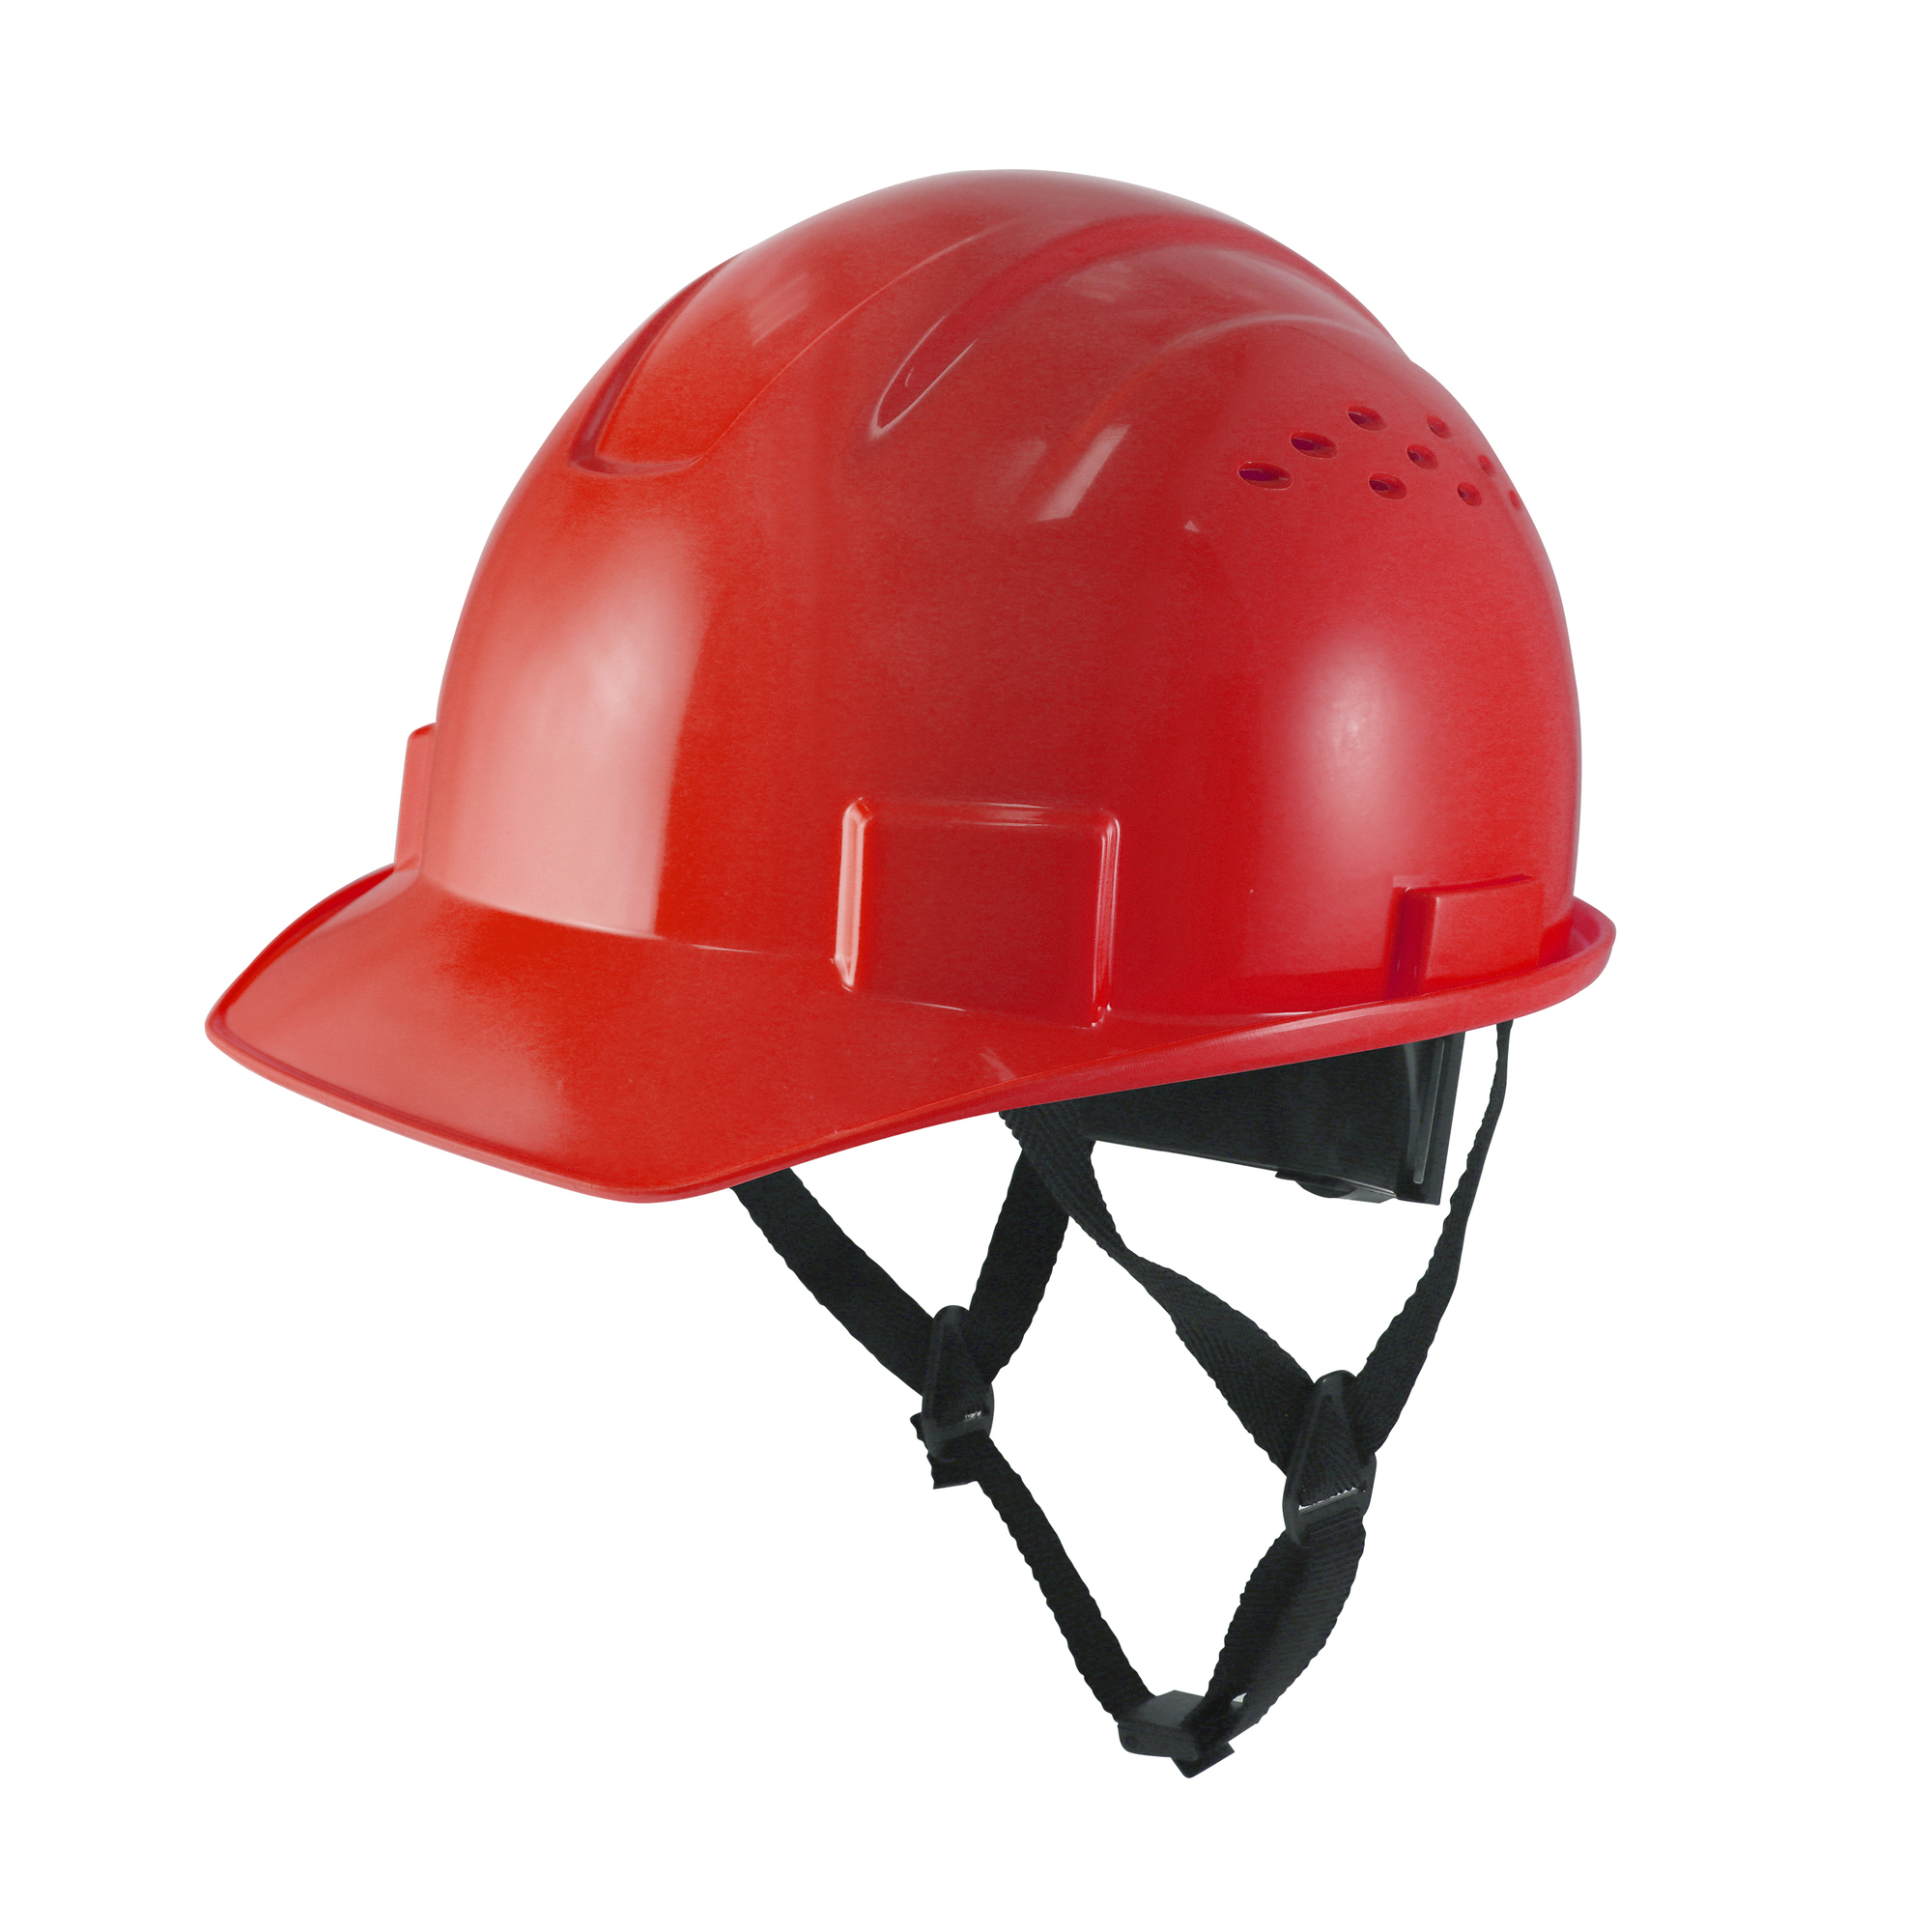 General Electric, Safety Helmet Vented- Red, Hard Hat Style Helmet, Hat Size One Size, Color Red, Model GH326R